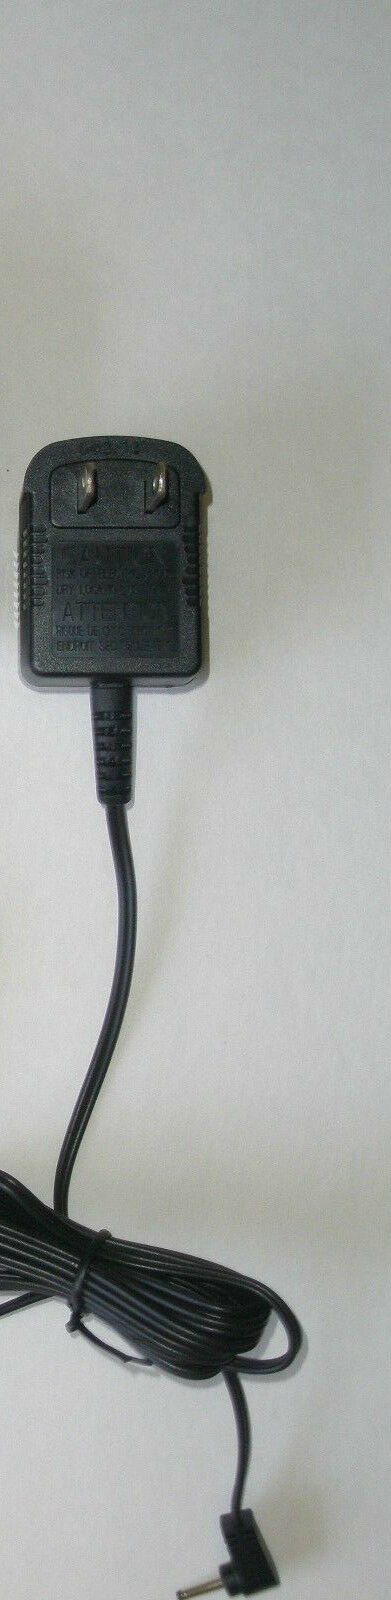 Primary image for 6v ac adapter cord = AT T remote charging base CRL82352 charger cradle stand att